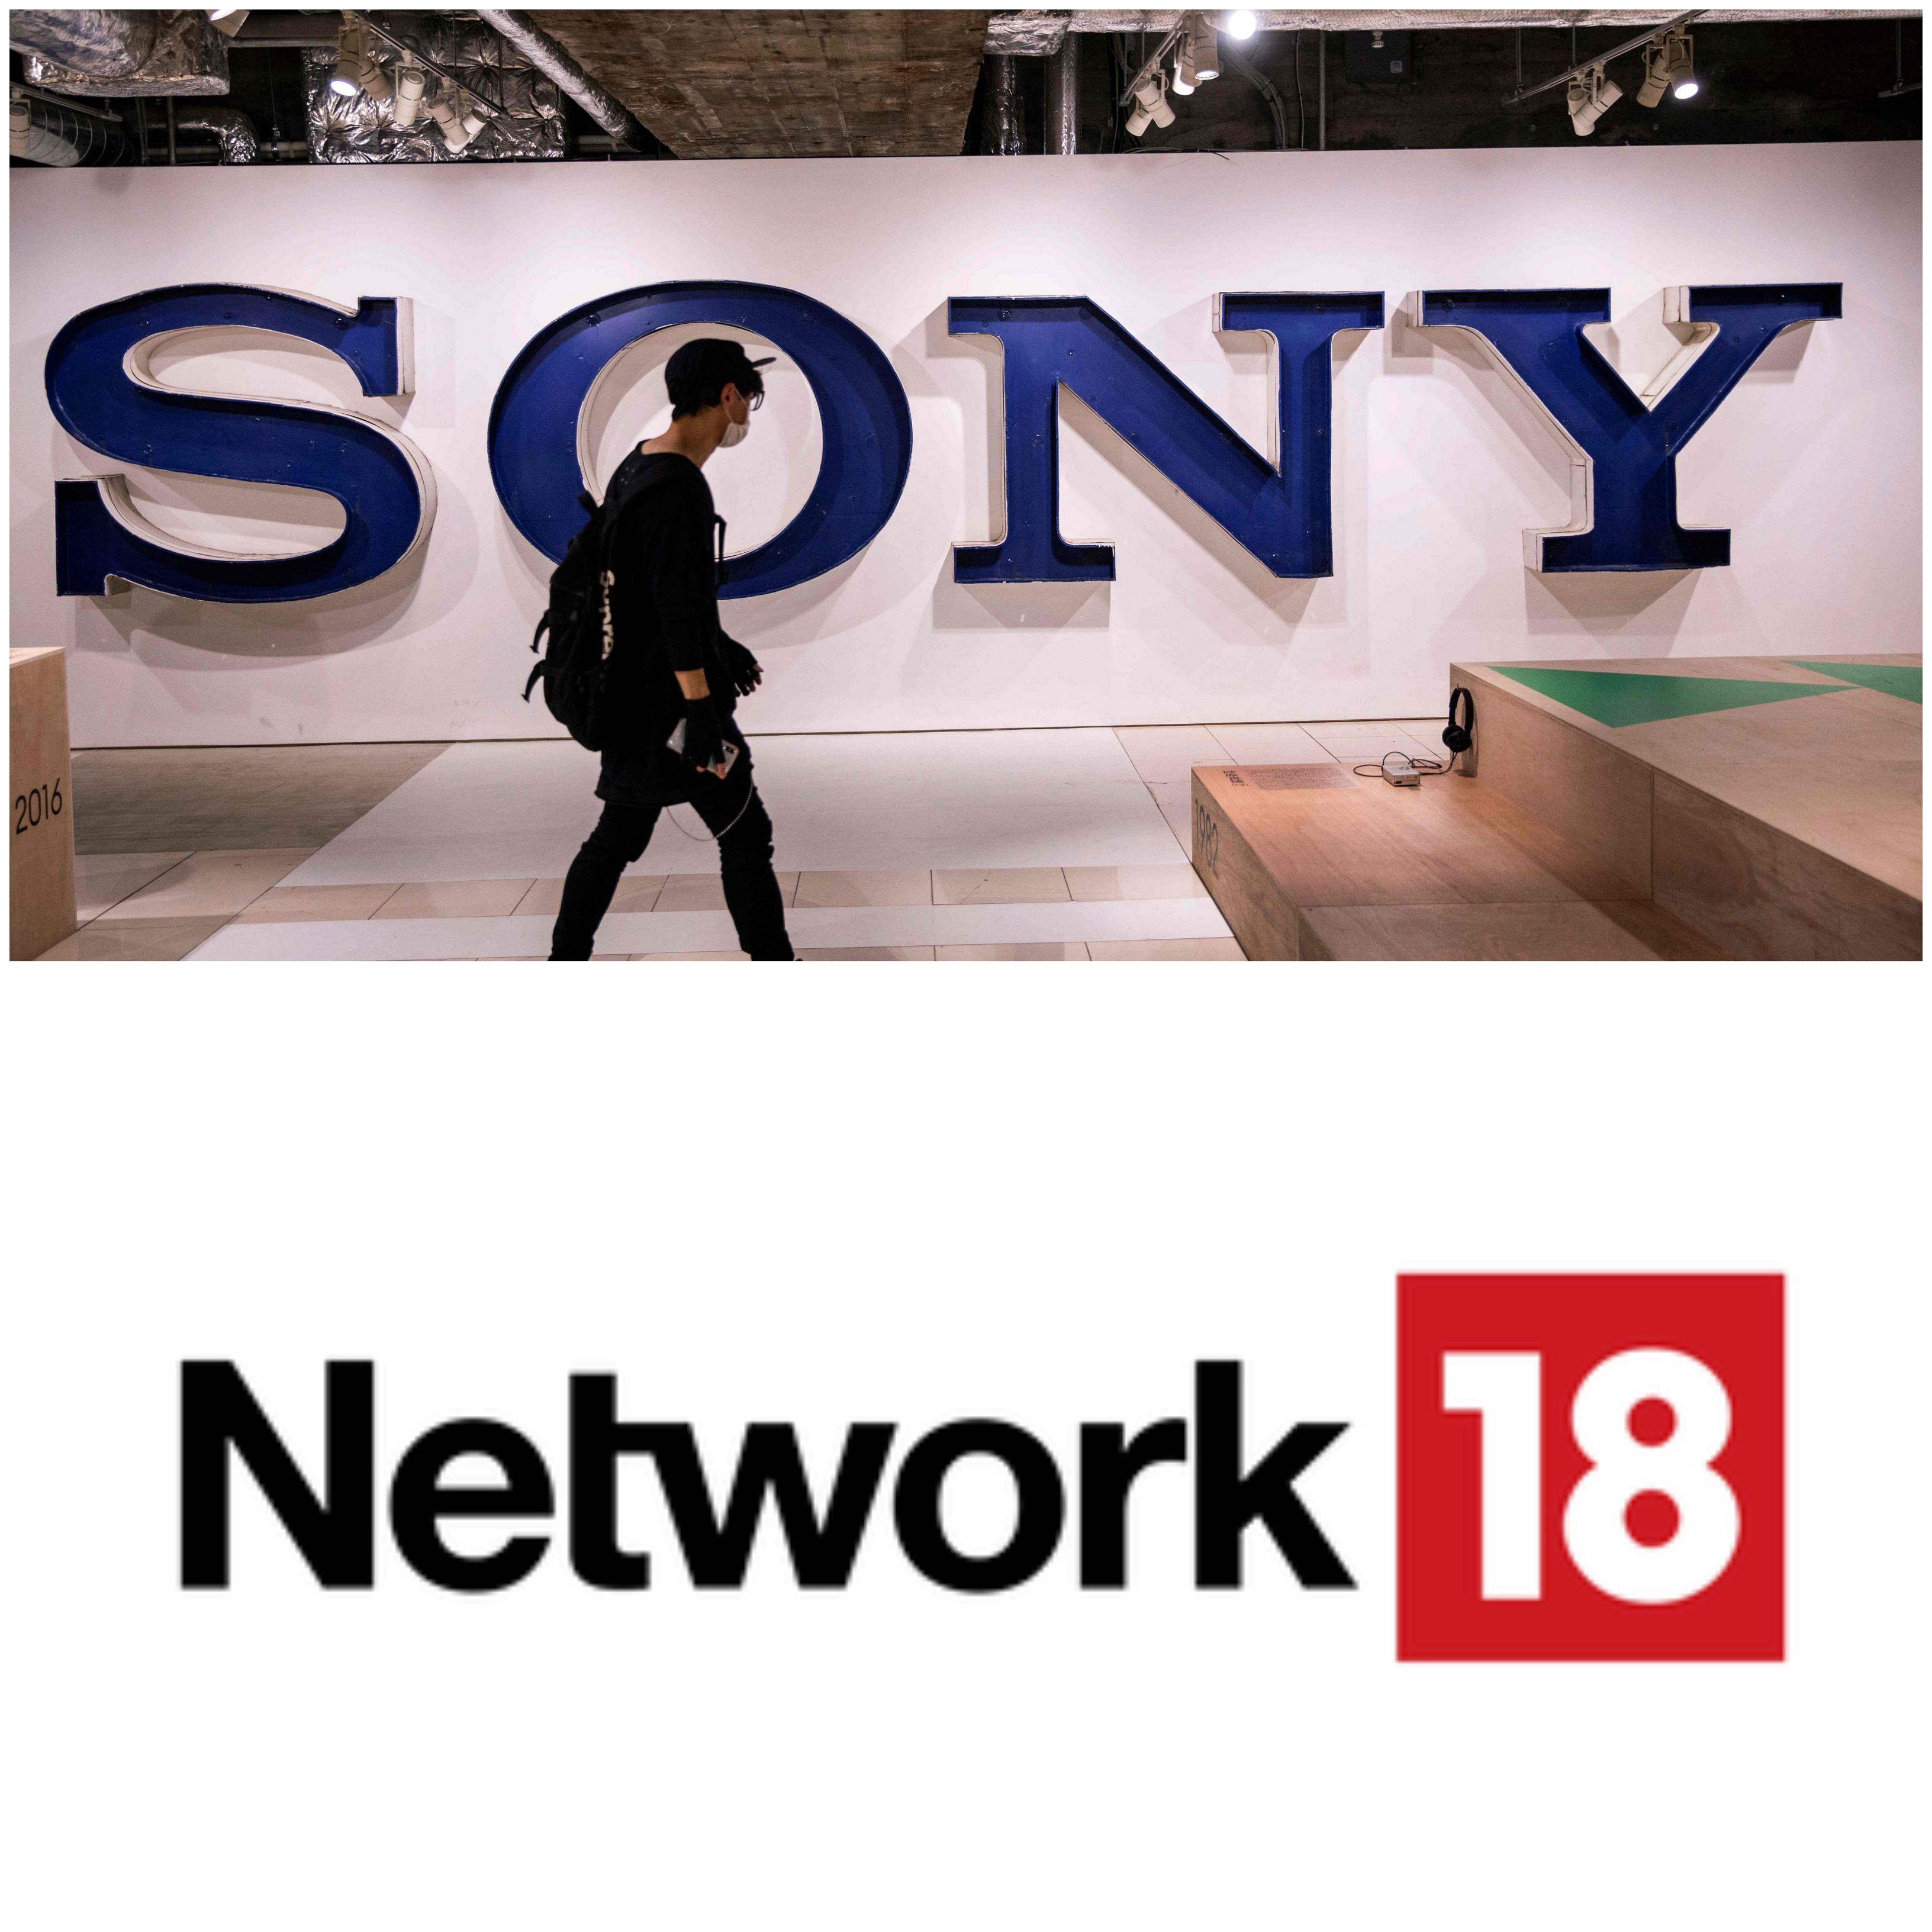 Sony Corp and Network 18 logos. (DH photo)